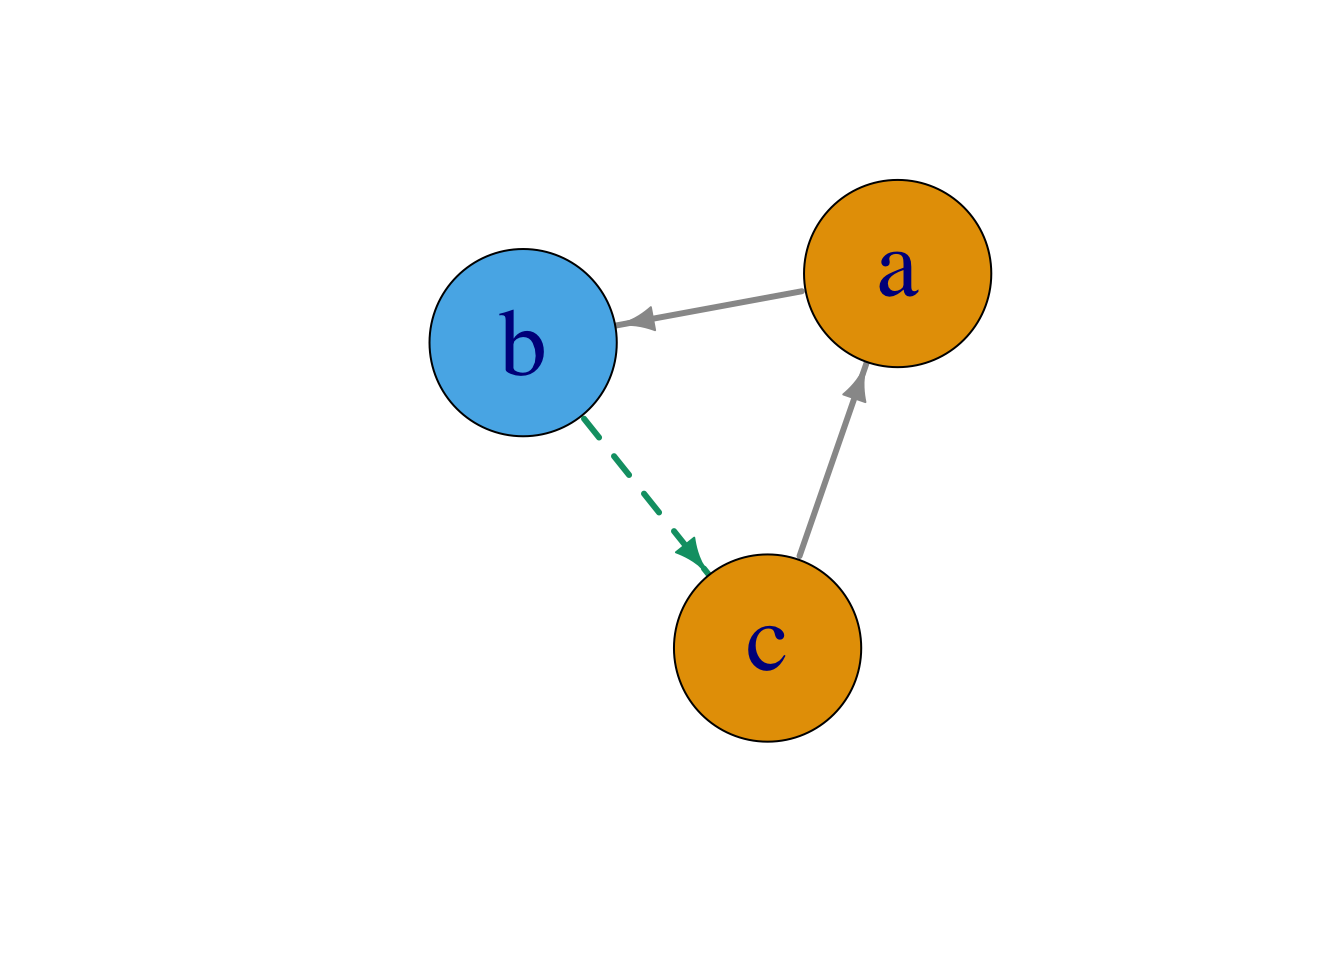 A network consisting of nodes, N, and directed edges E.